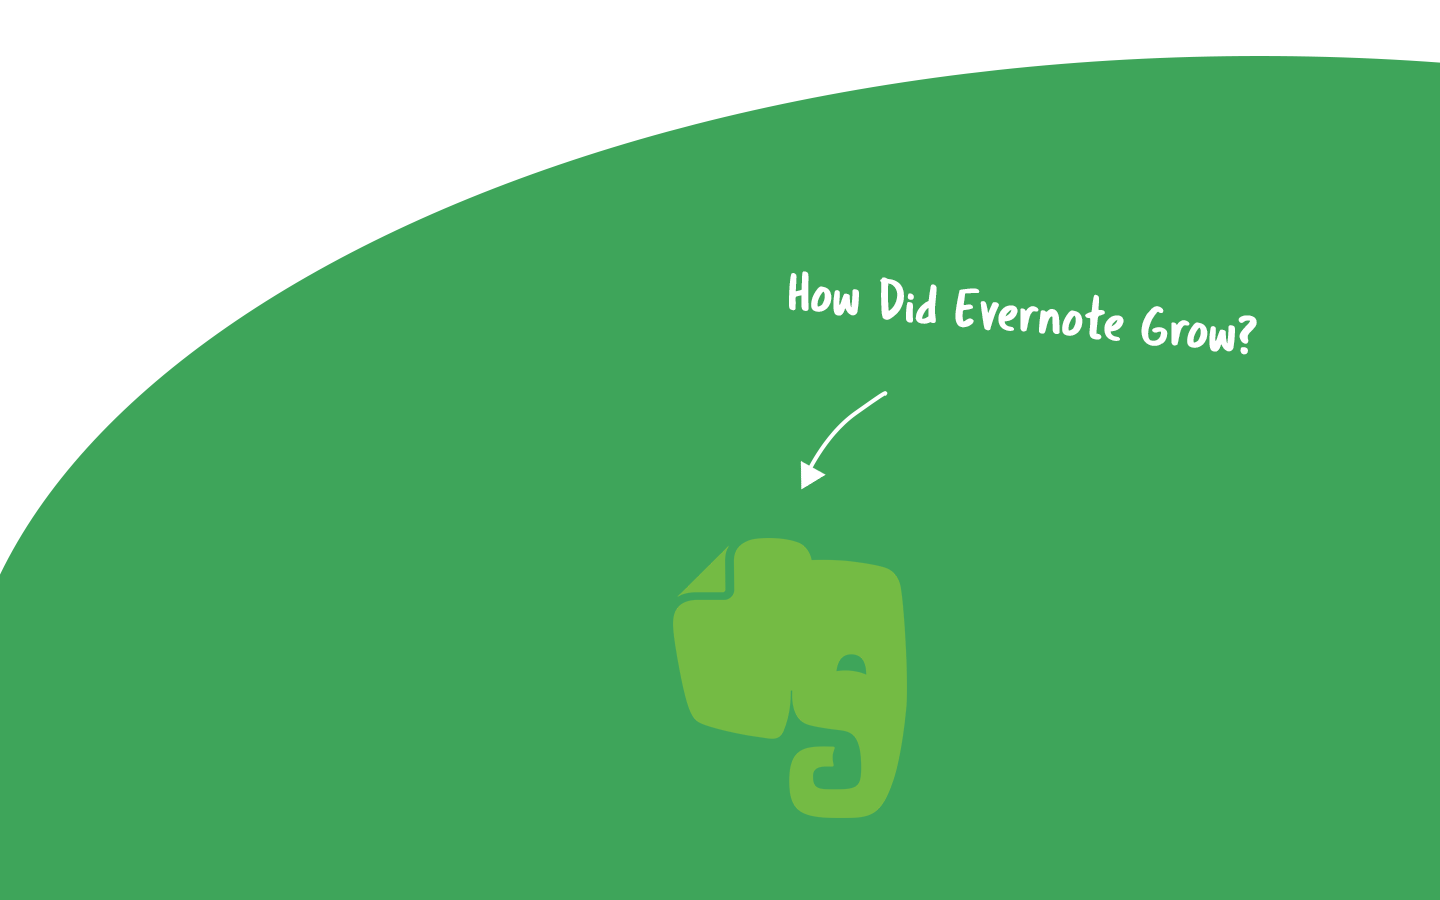 Evernote cost per year 2020